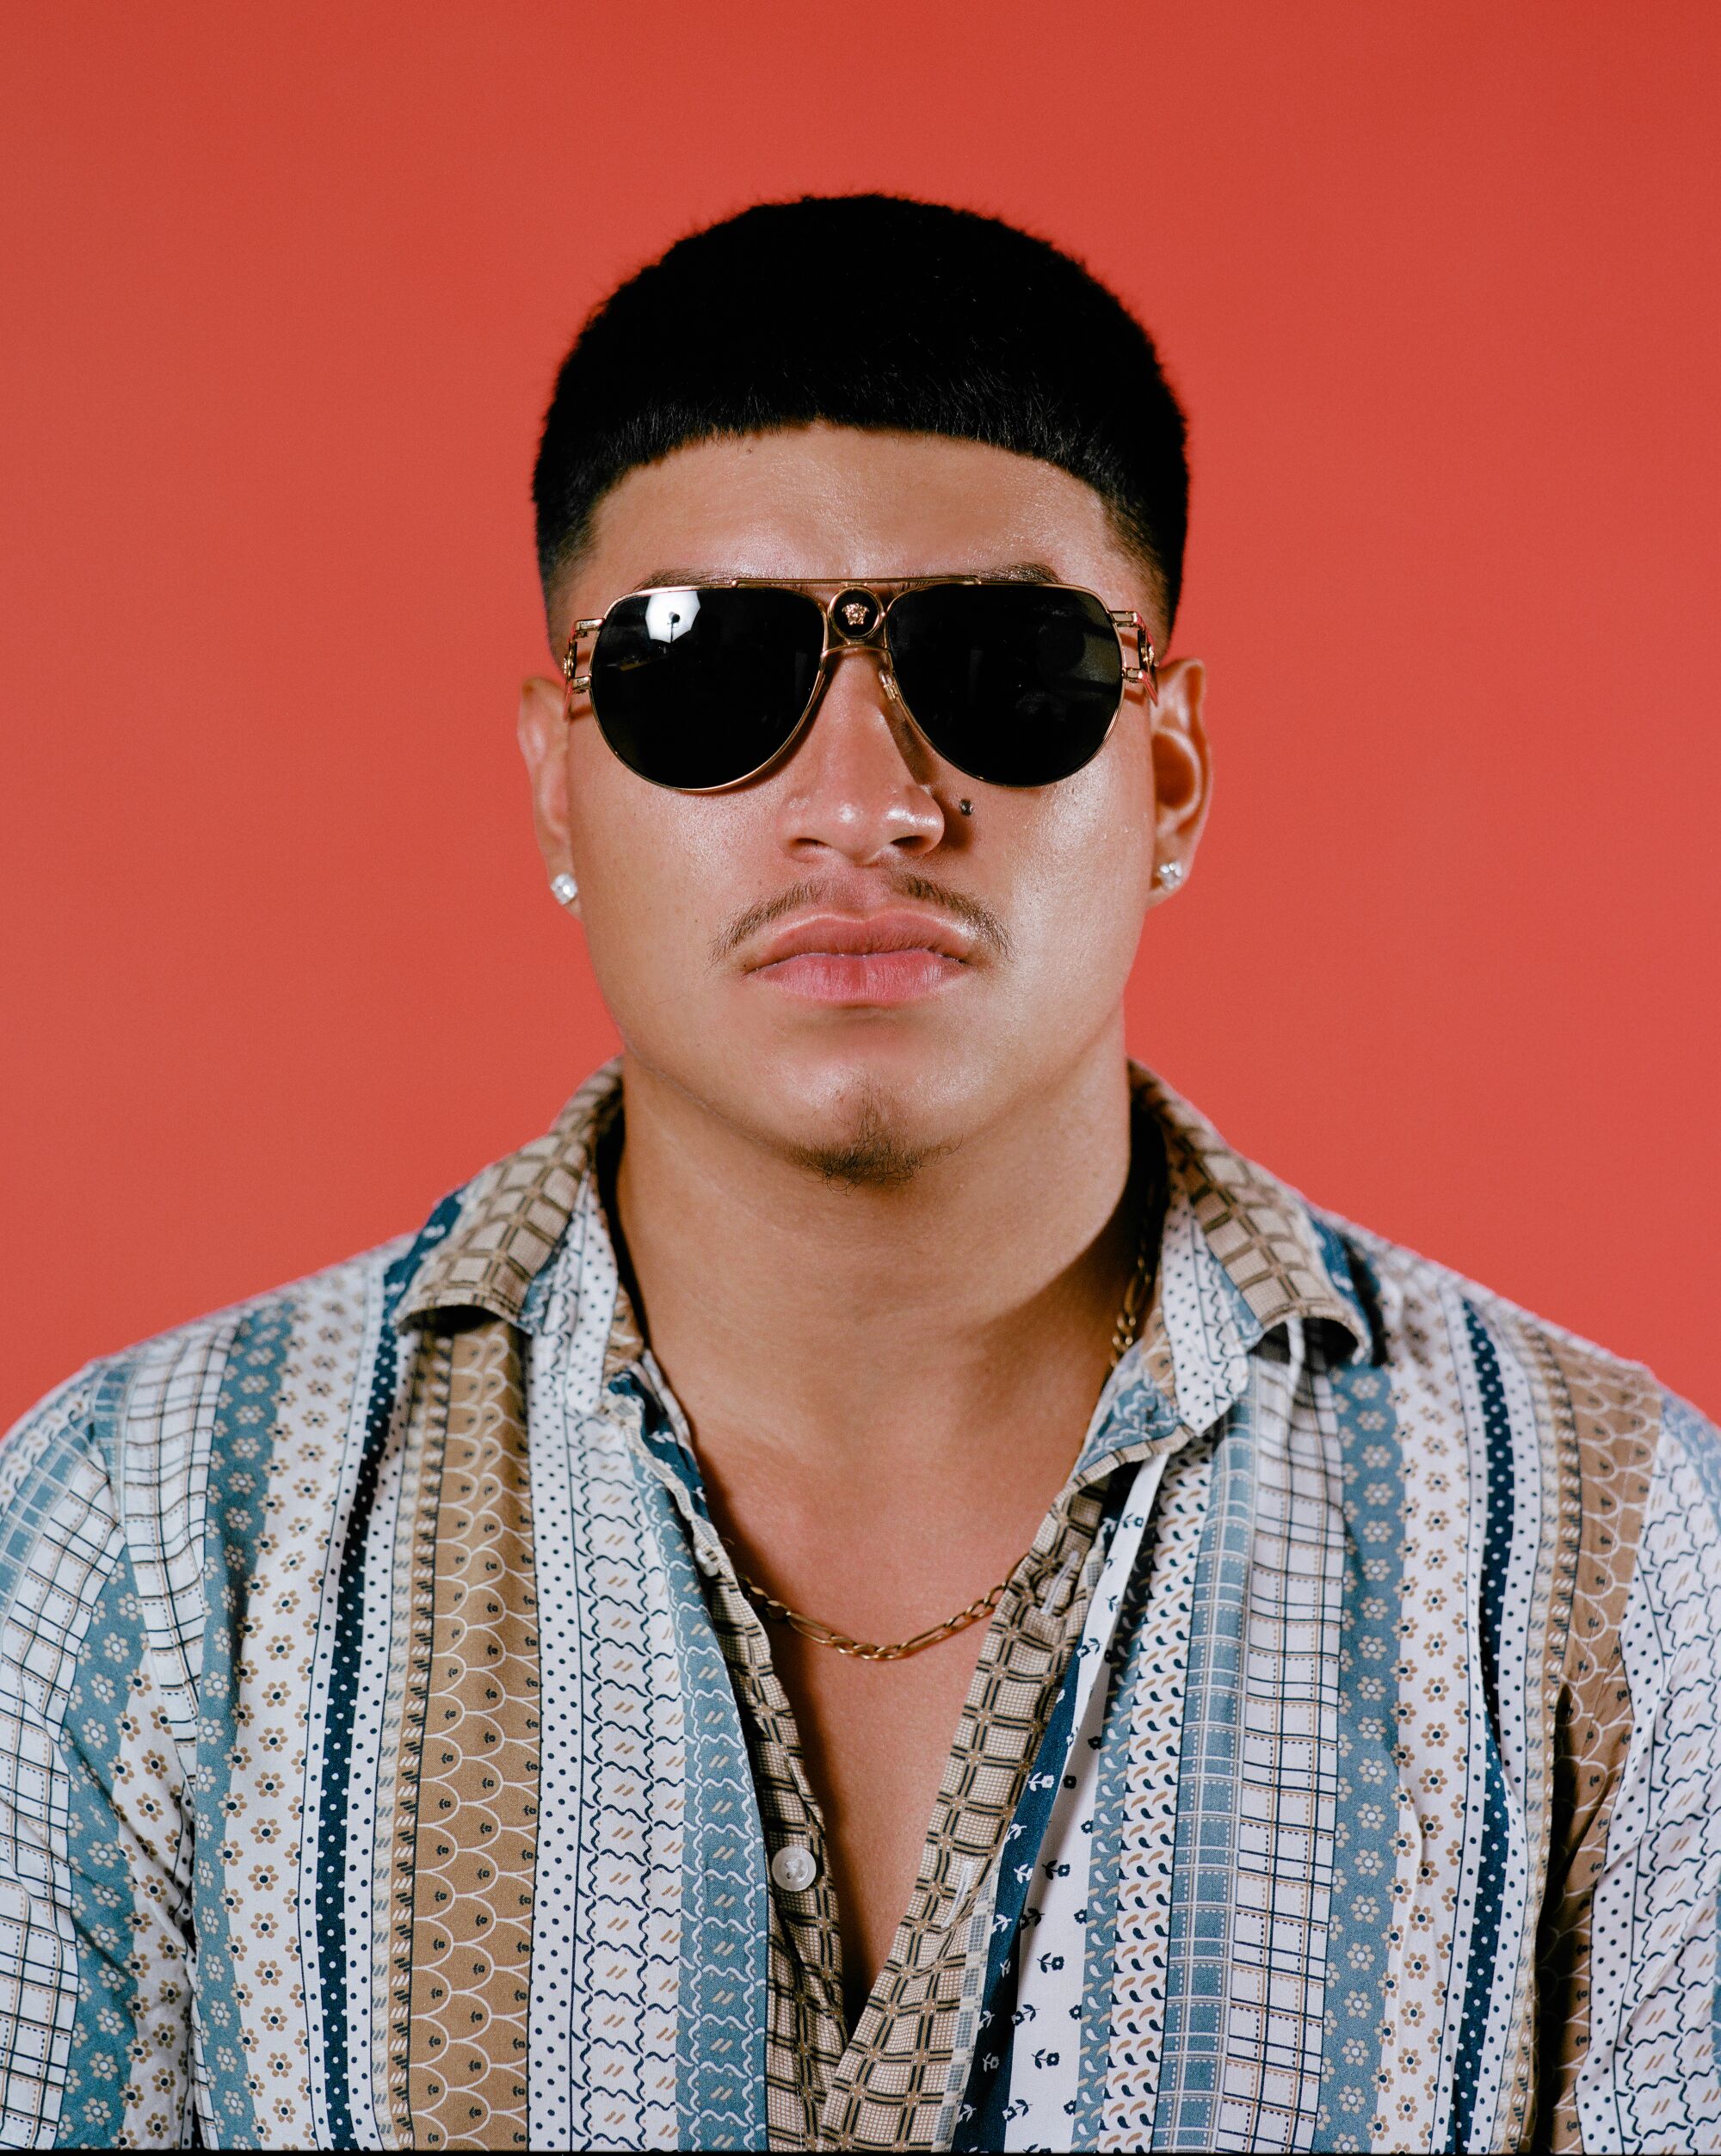 Image of a young man in an Edgar haircut wearing sunglasses.